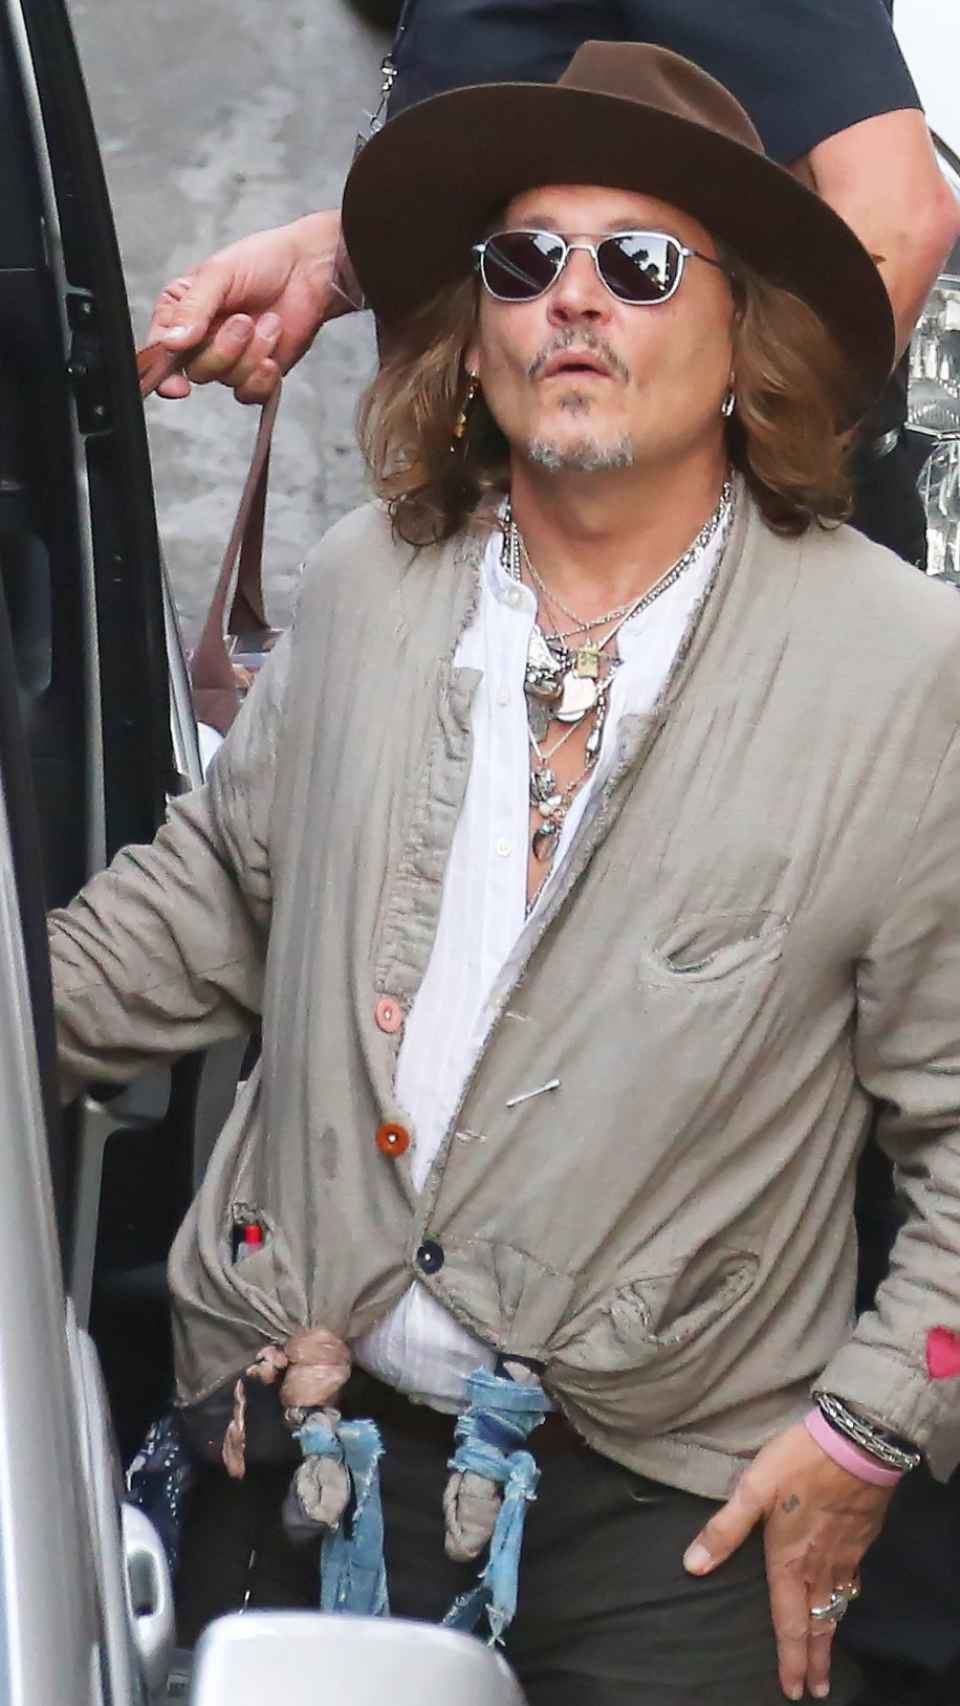 Johnny Depp resuming his professional activity after the trial.